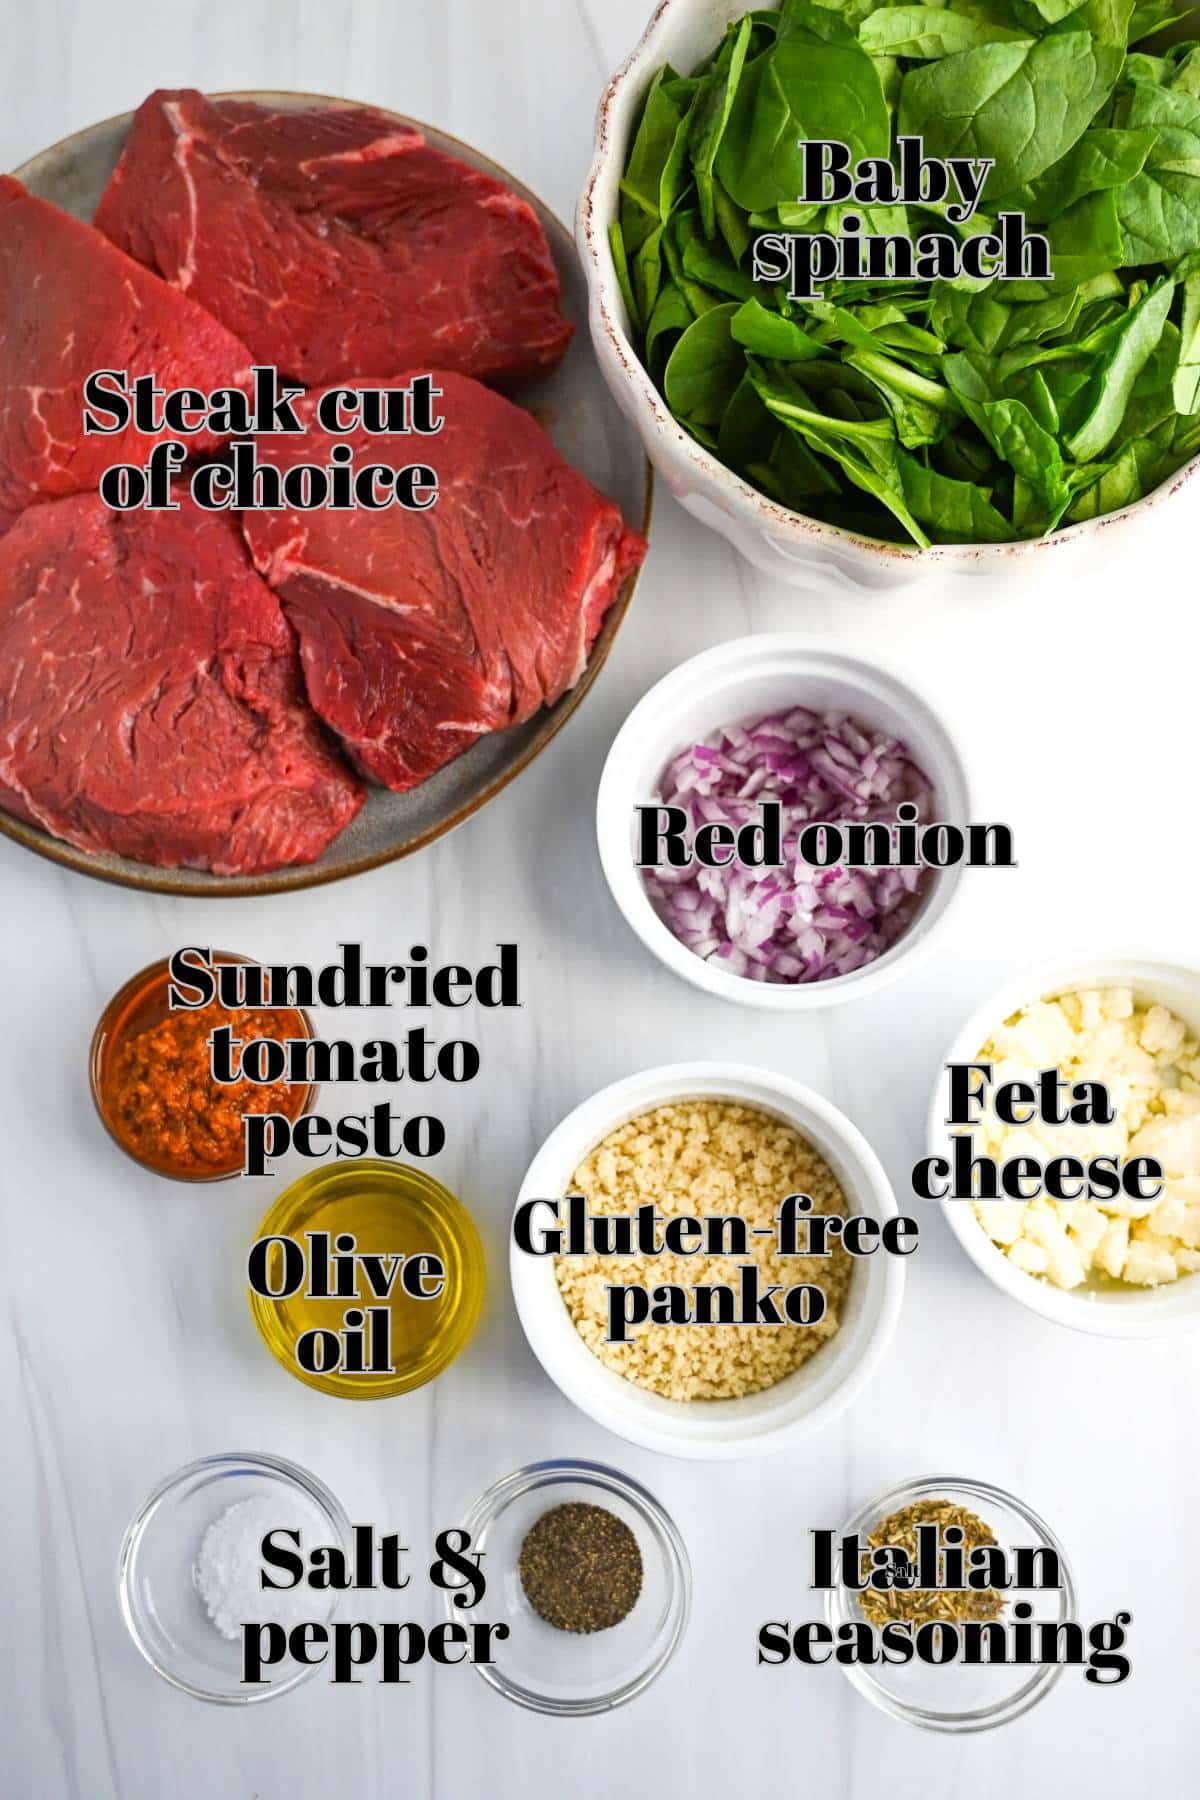 ingredients for Mediterranean steak measured out in containers on a counter